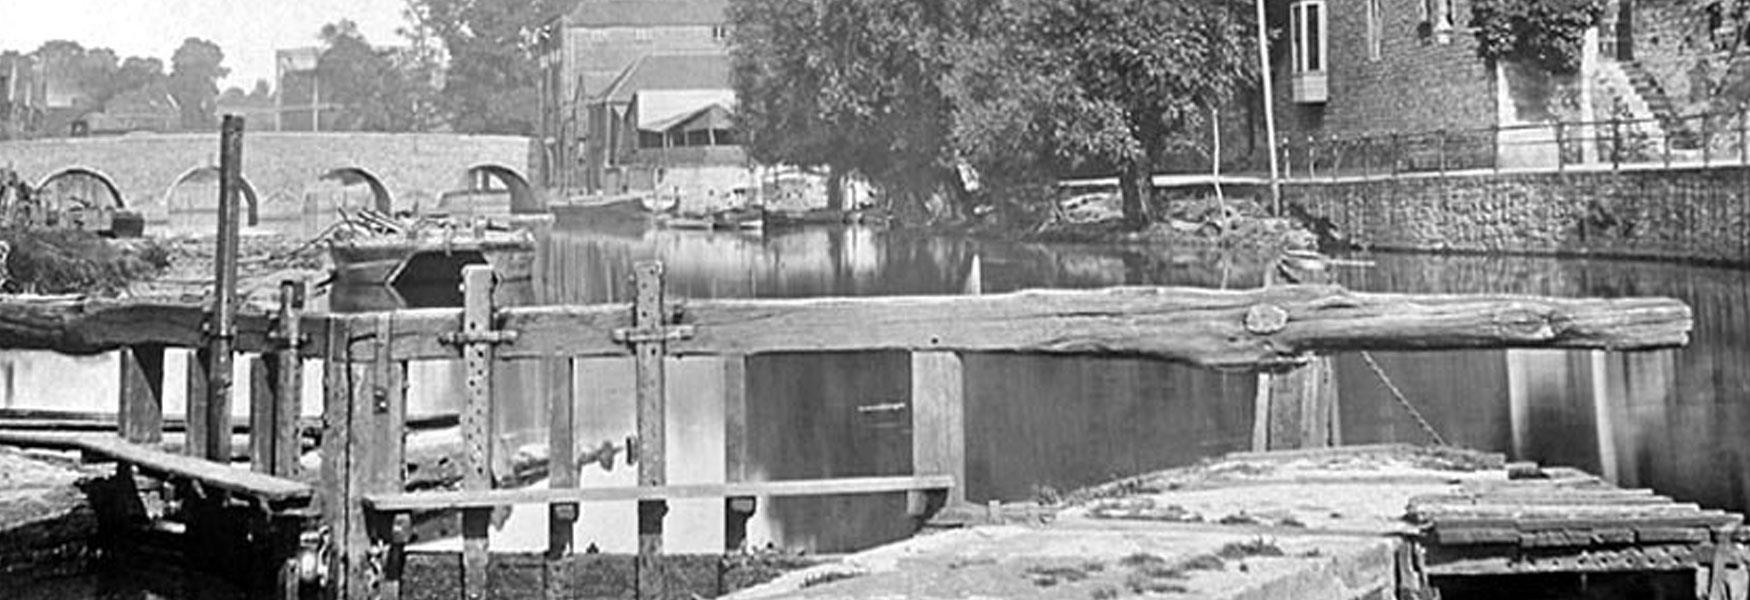 Black and white picture of Lockgates at Lockmeadow in the 1870's.